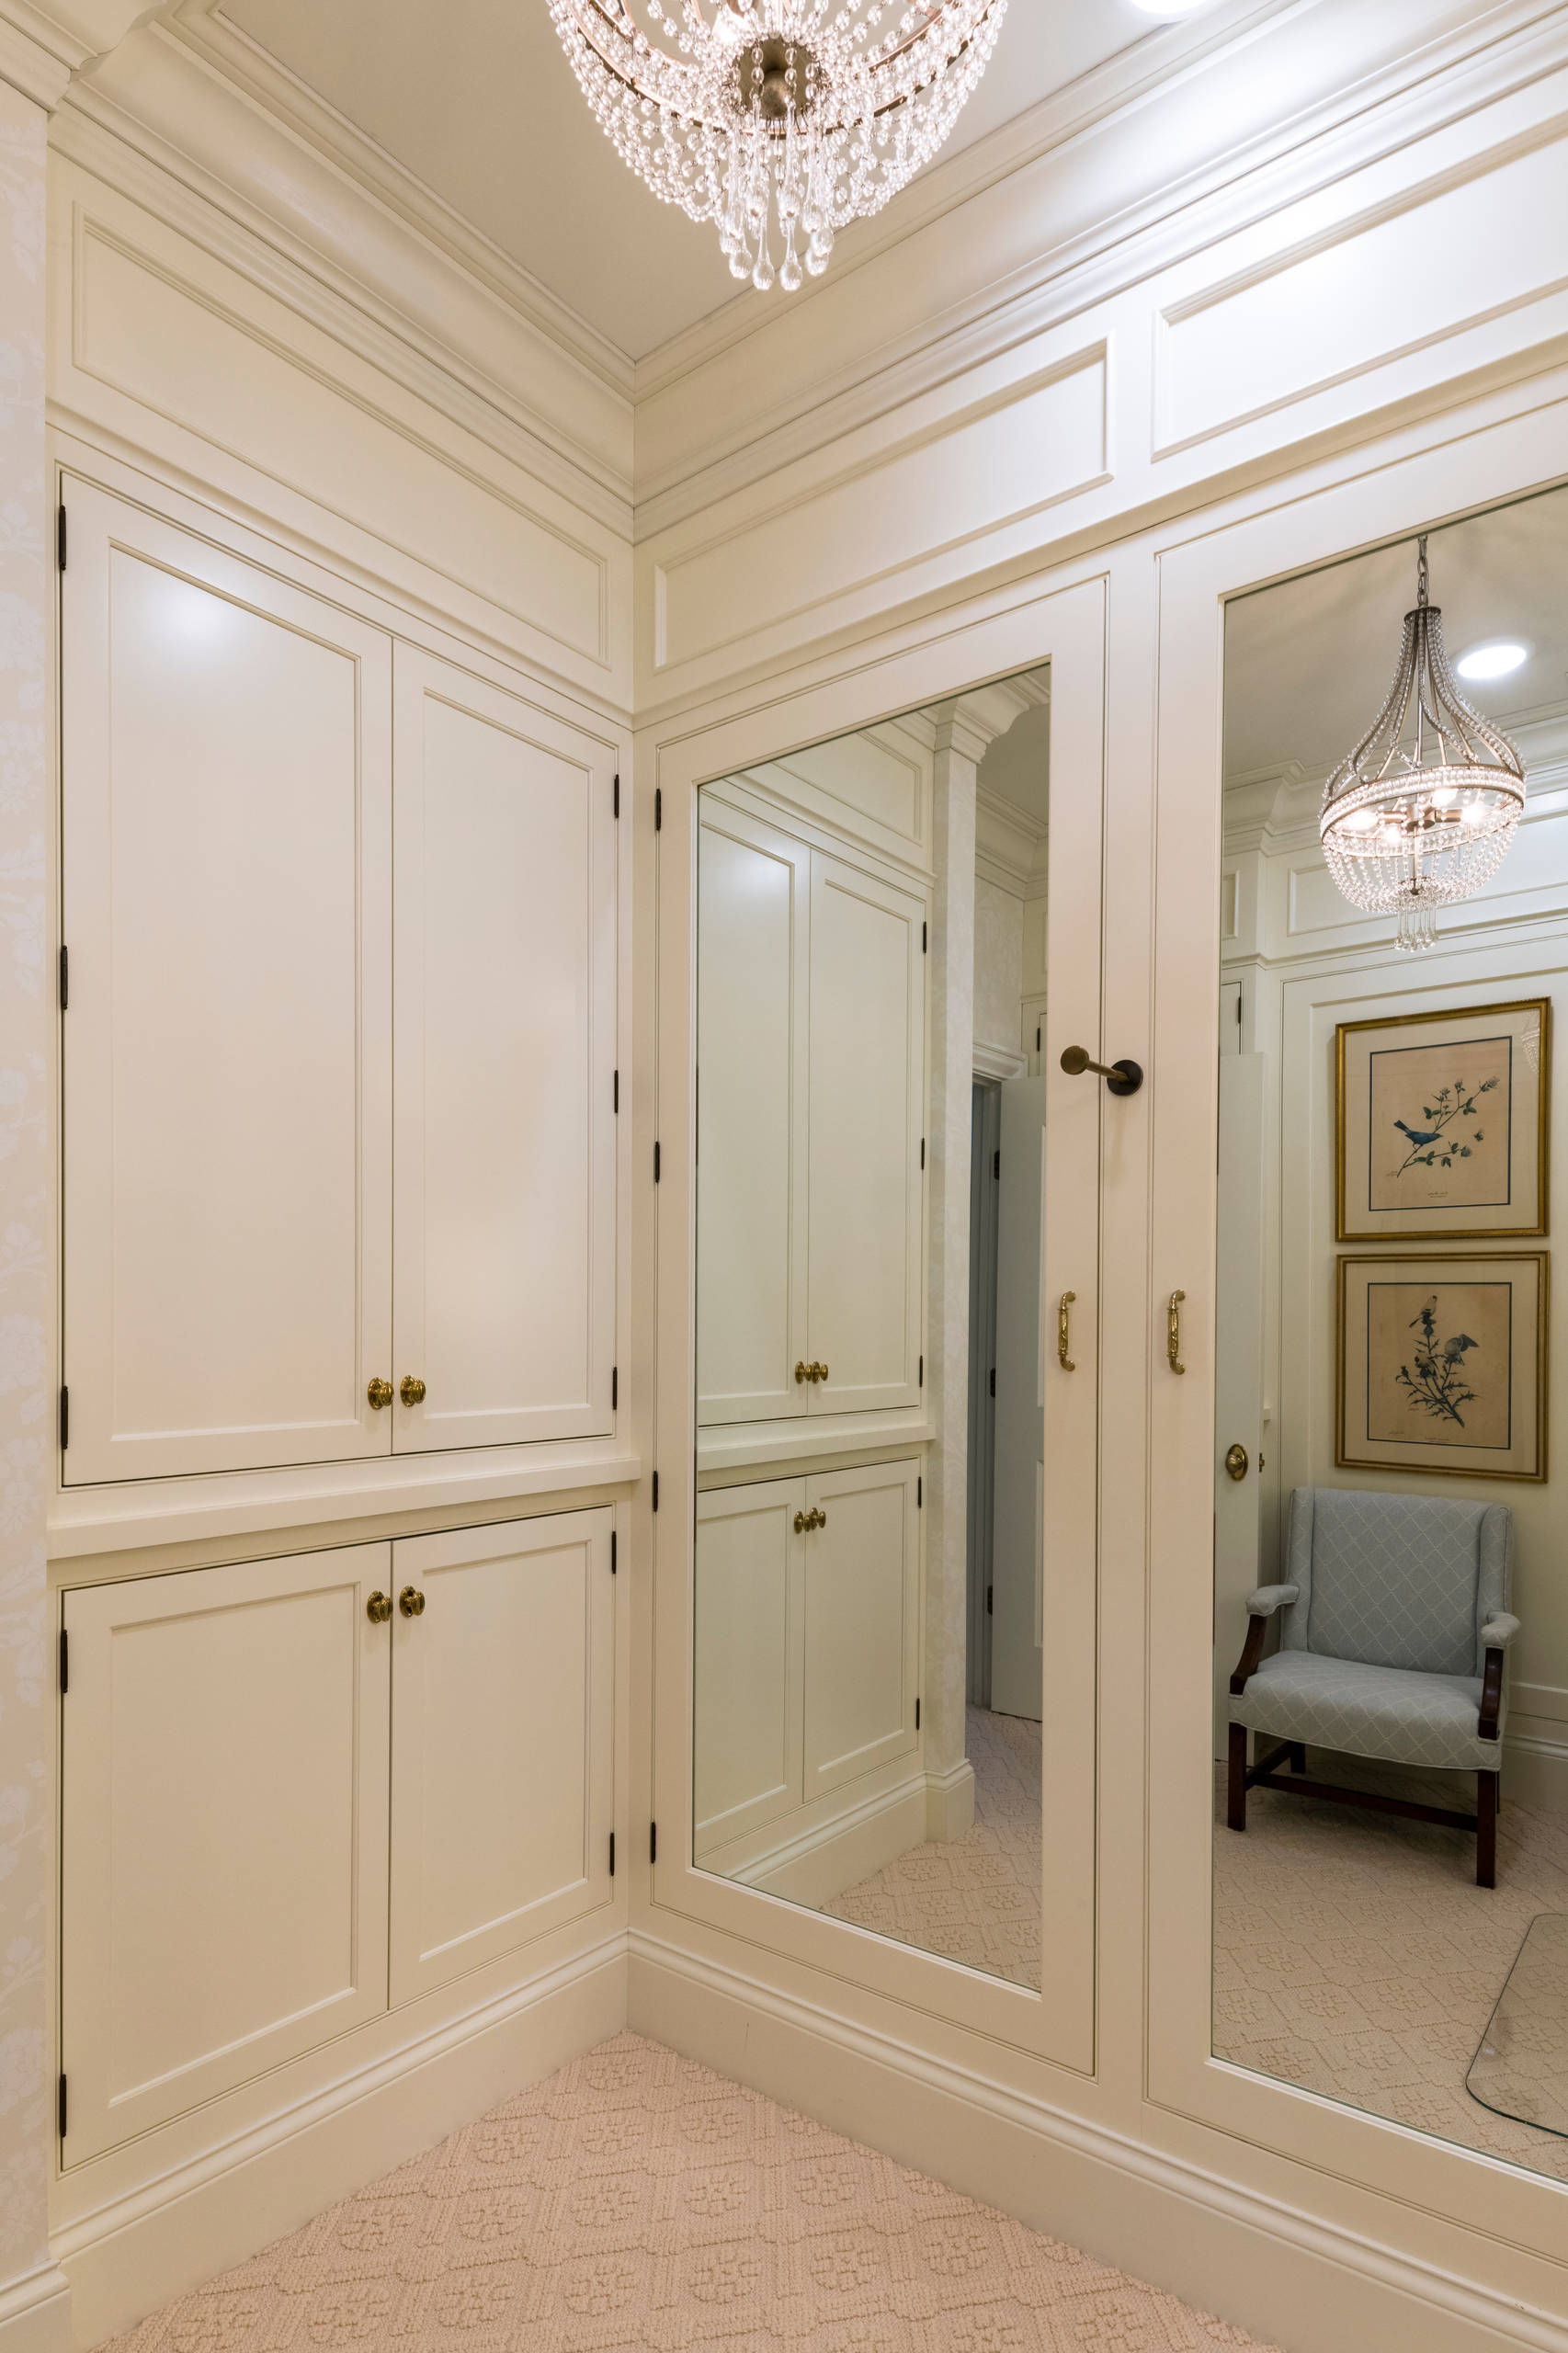 5th Avenue Style by Don Justice Cabinet Makers